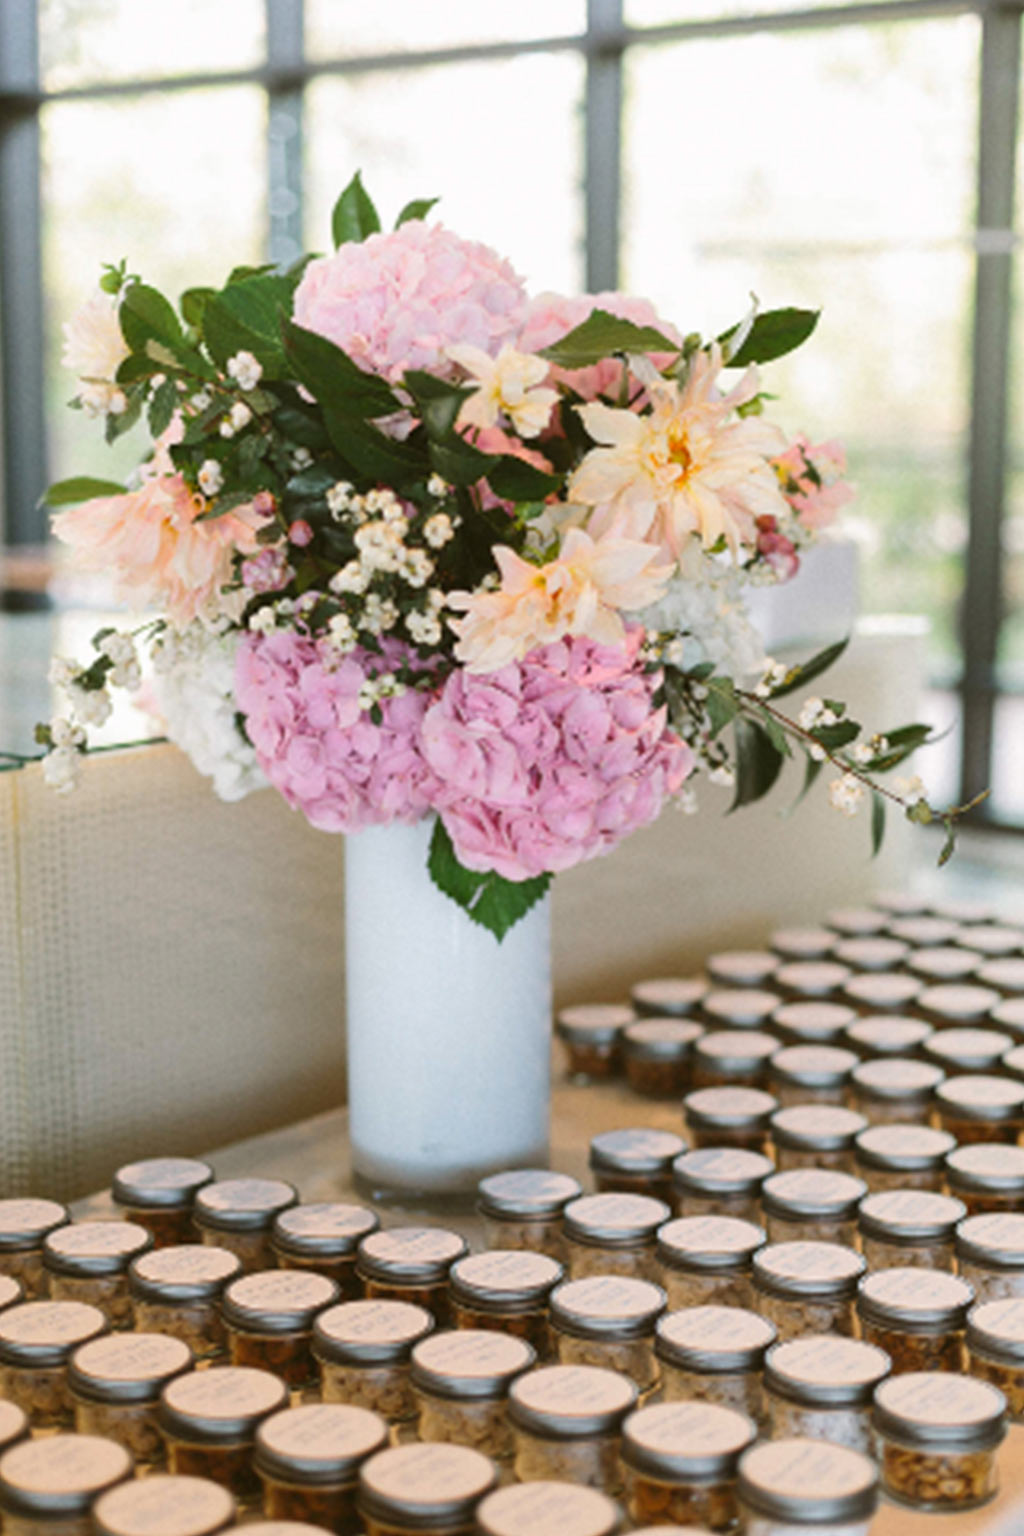 Cookie jar wedding escort card setup with pink and peach floral